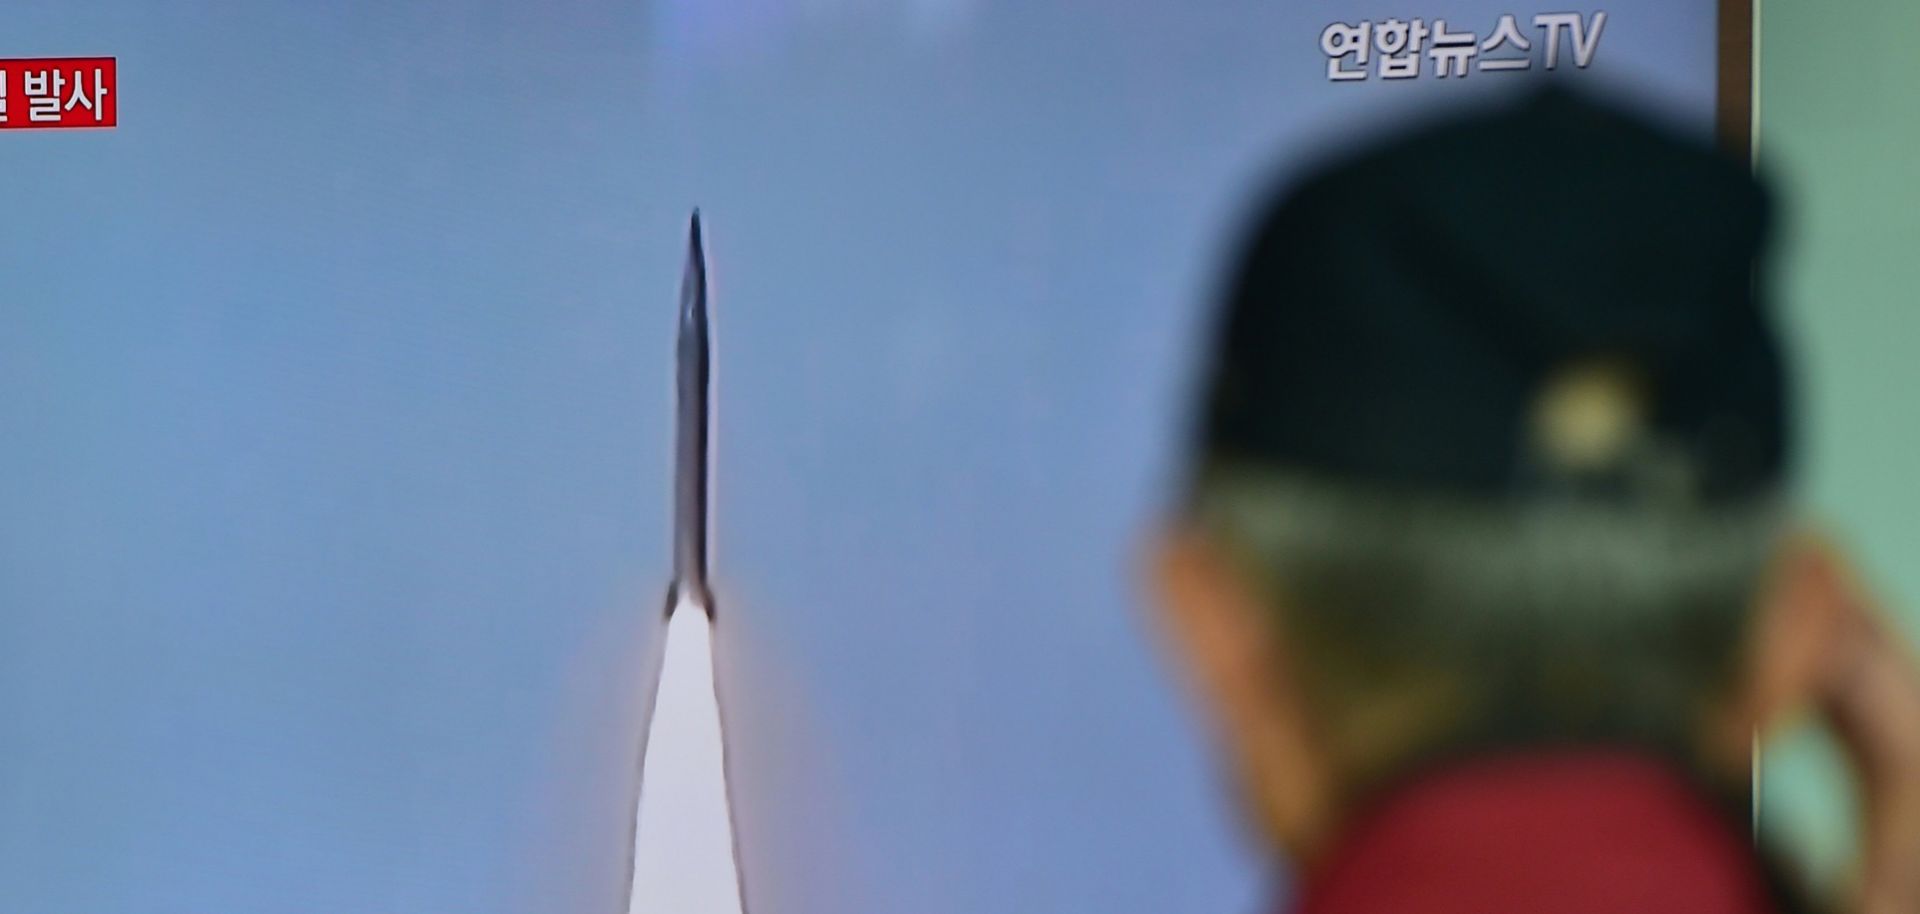 The term 'provocation' gets tossed around a lot in reaction to North Korean rocket launches and other geopolitical events, but ofttimes, it is a misuse of language.